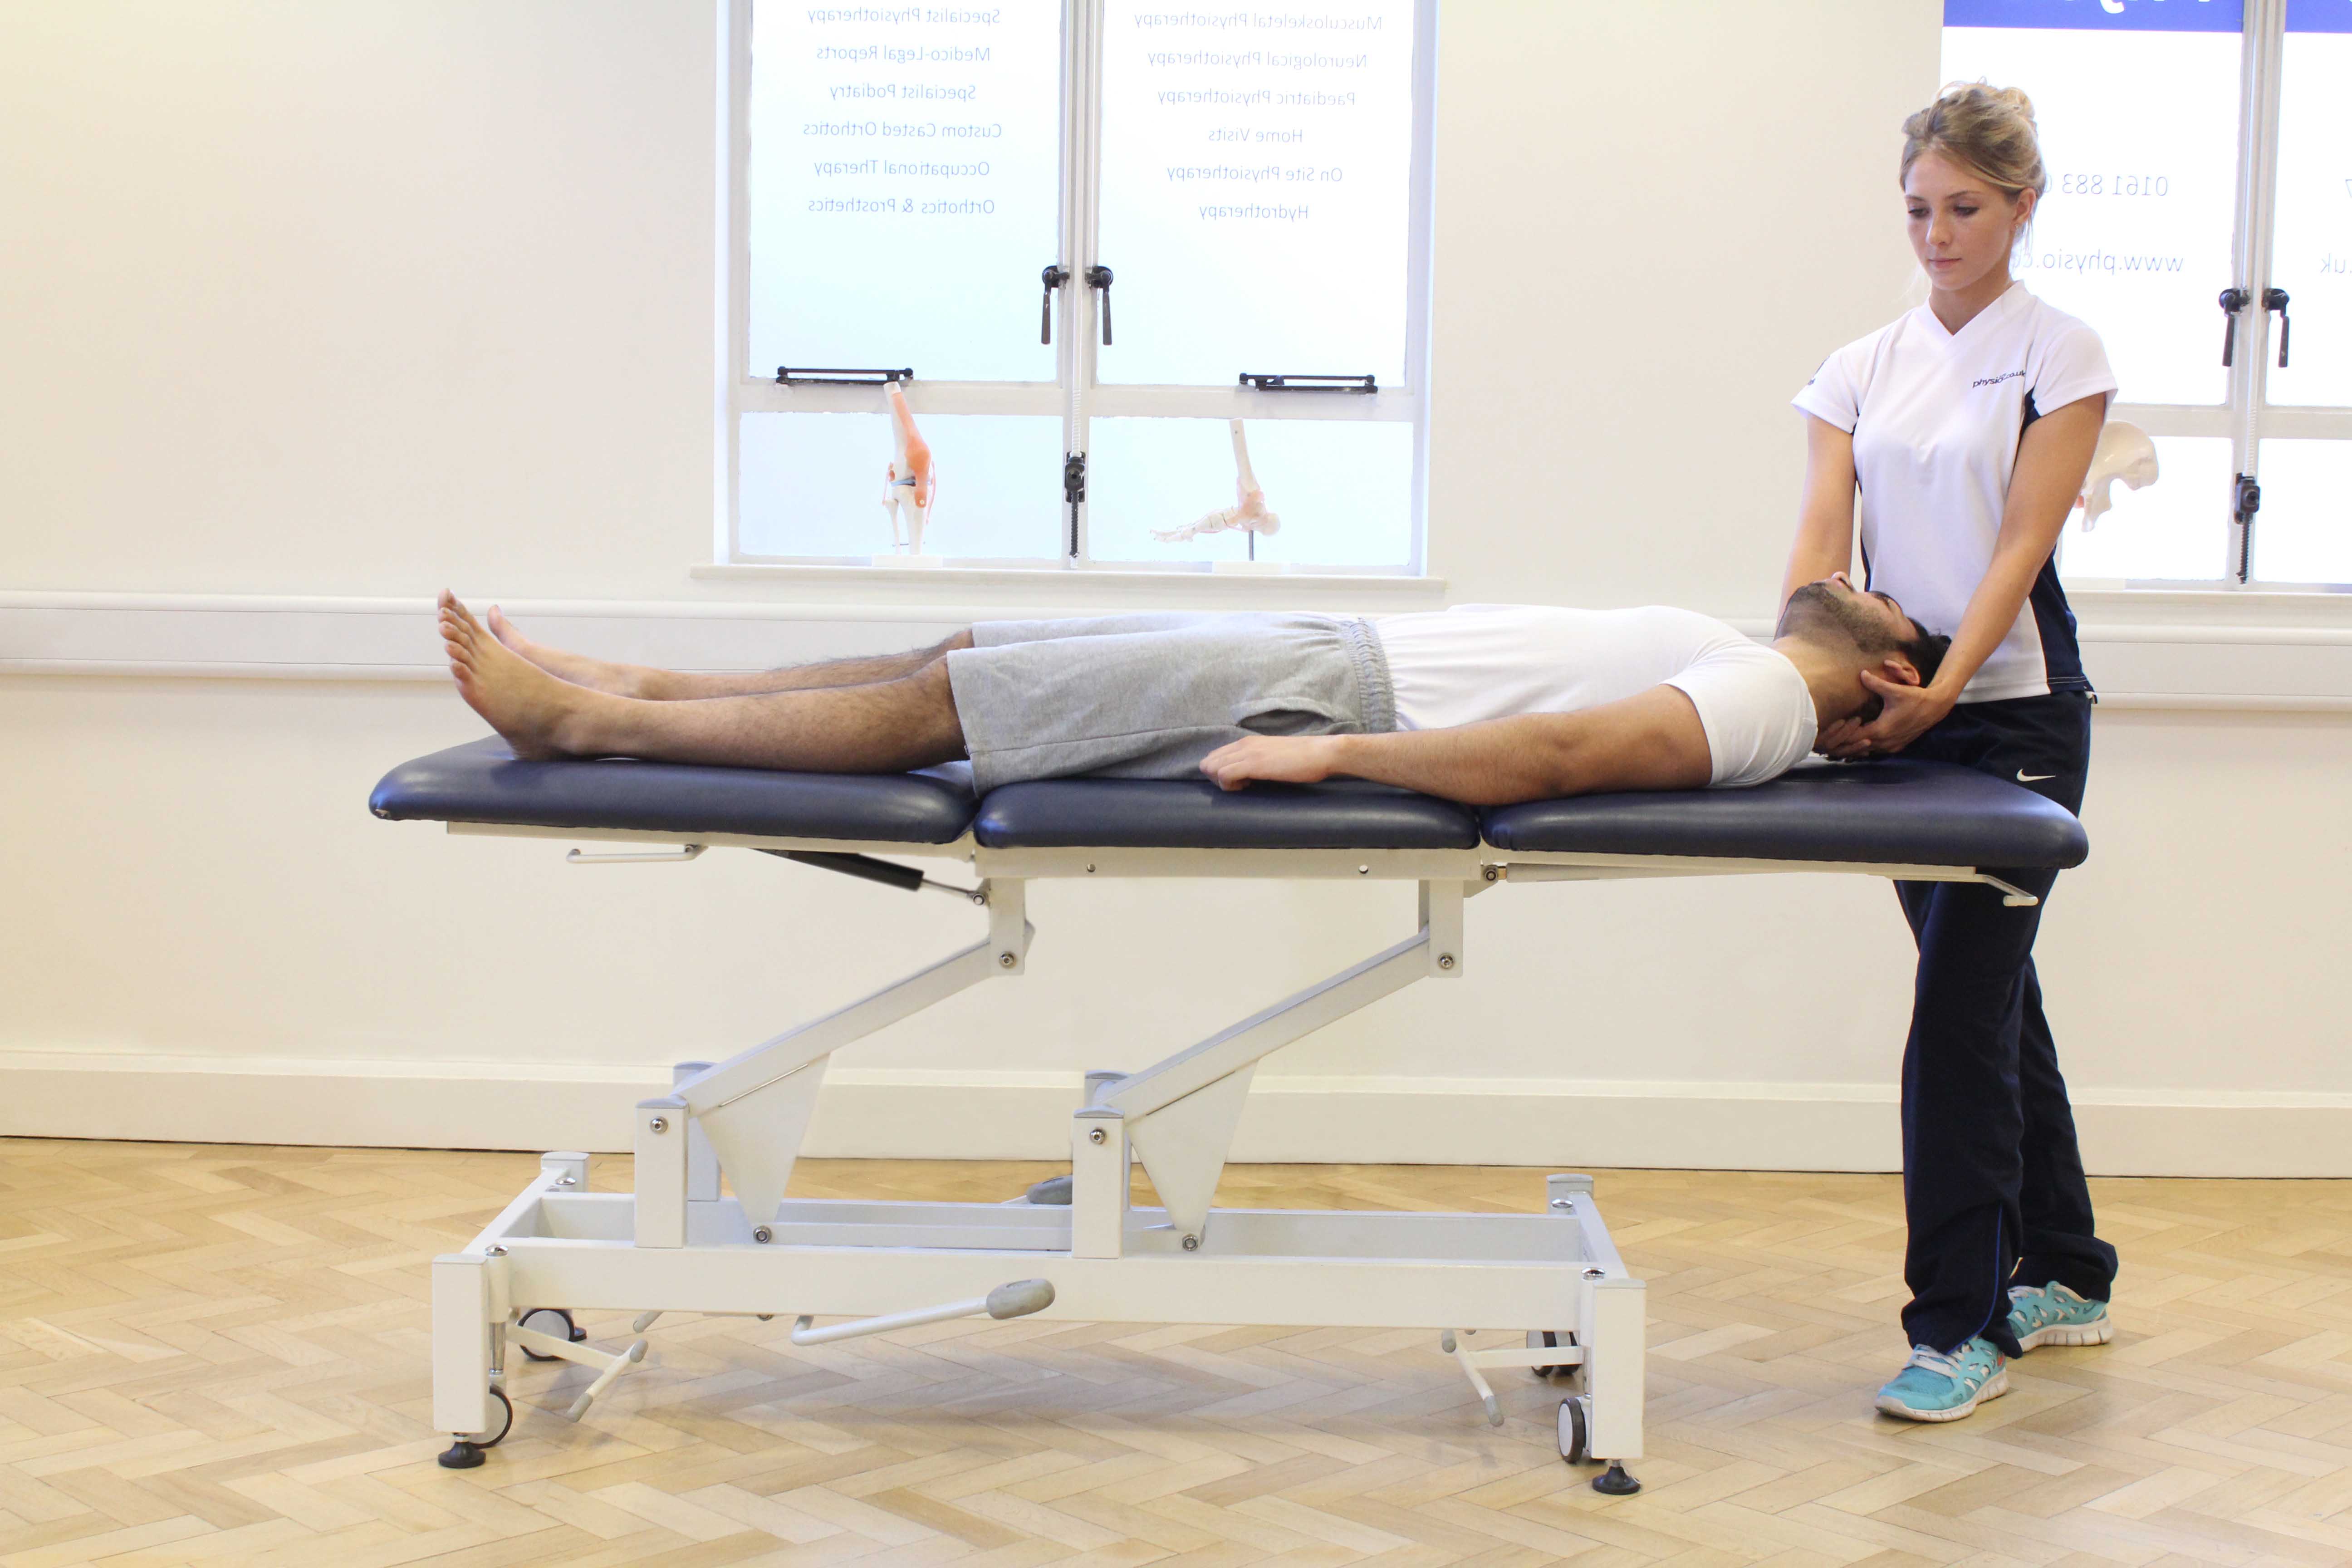 Vestibular rehabilitation exercies carried out by a specilaist therapist